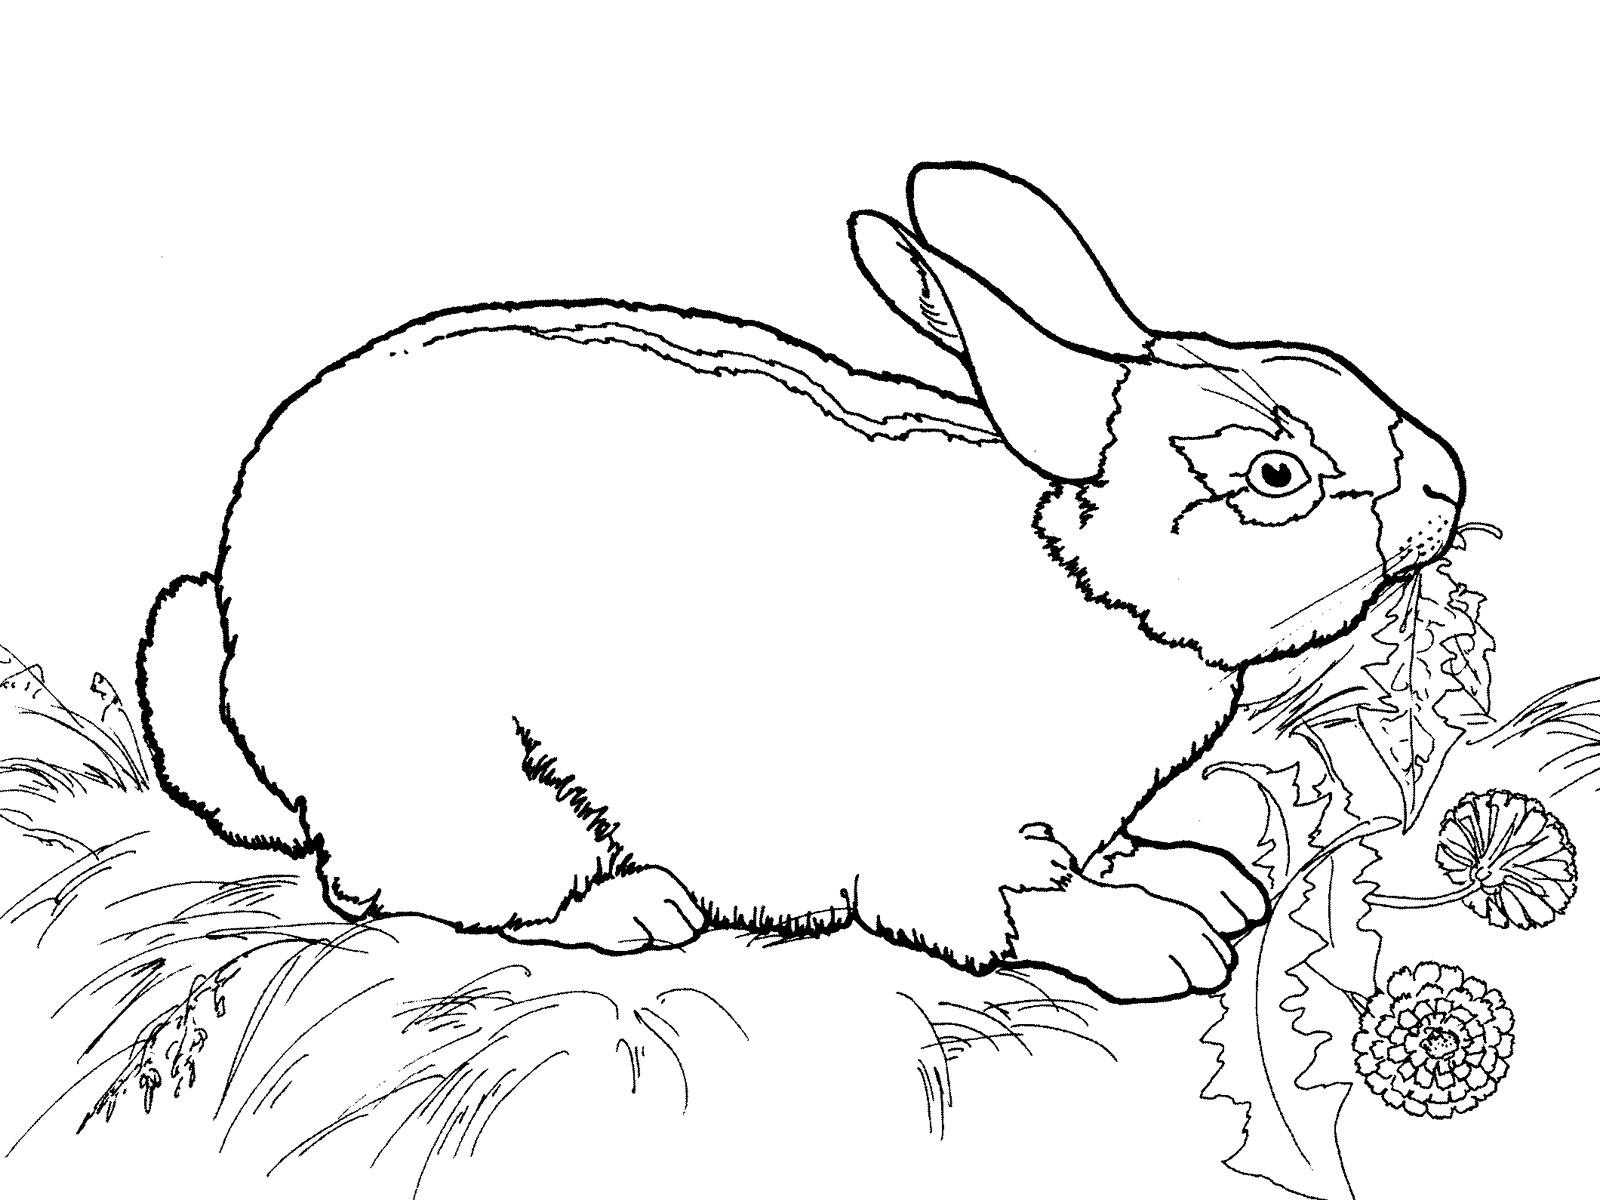 Coloring The rabbit eats the grass. Category Animals. Tags:  hare, grass, flowers.